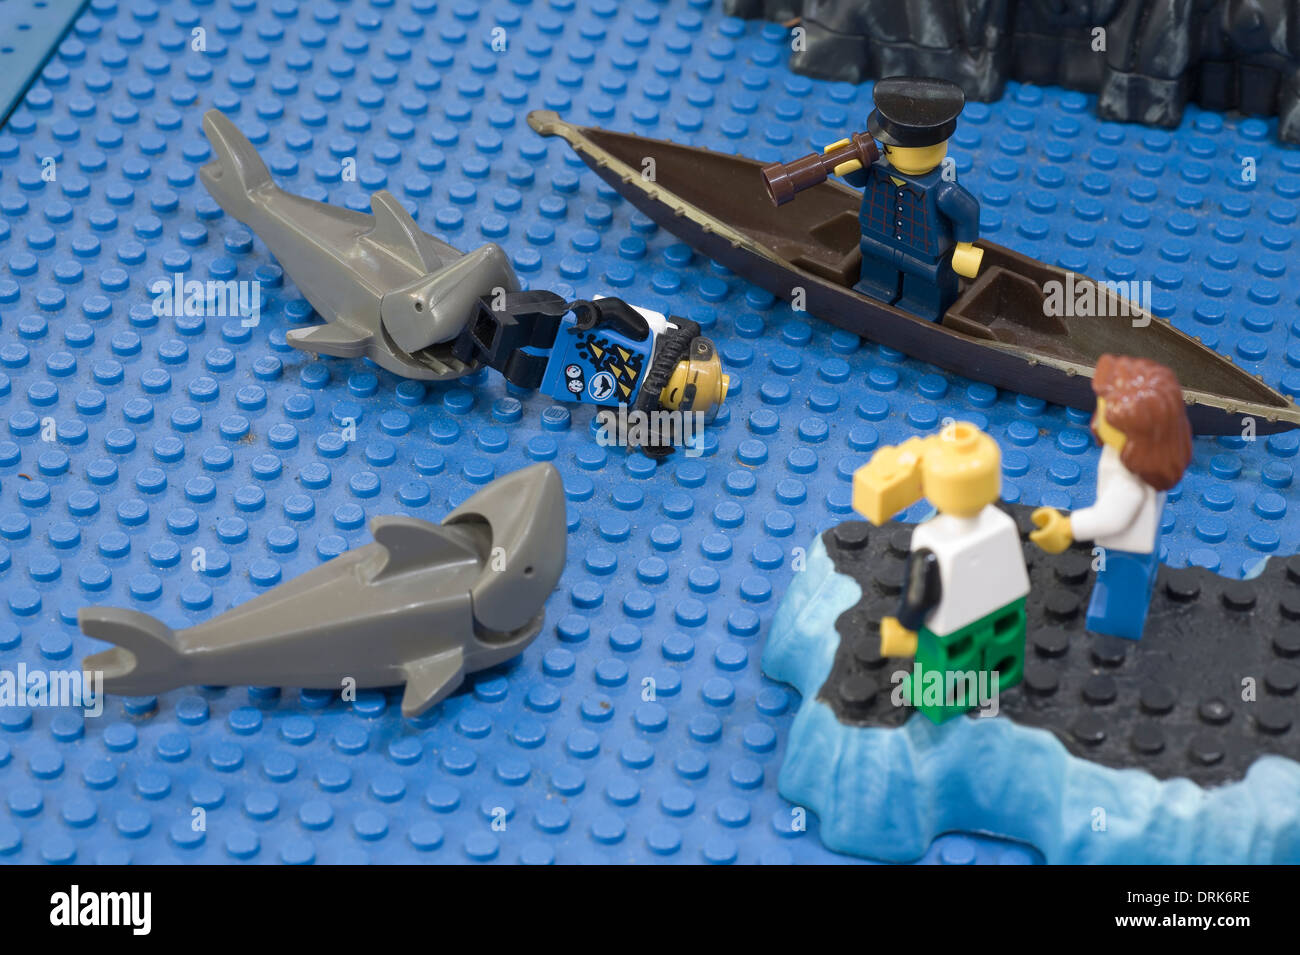 A scuba diver is attacked by a Great White shark in legoland, Stock Photo